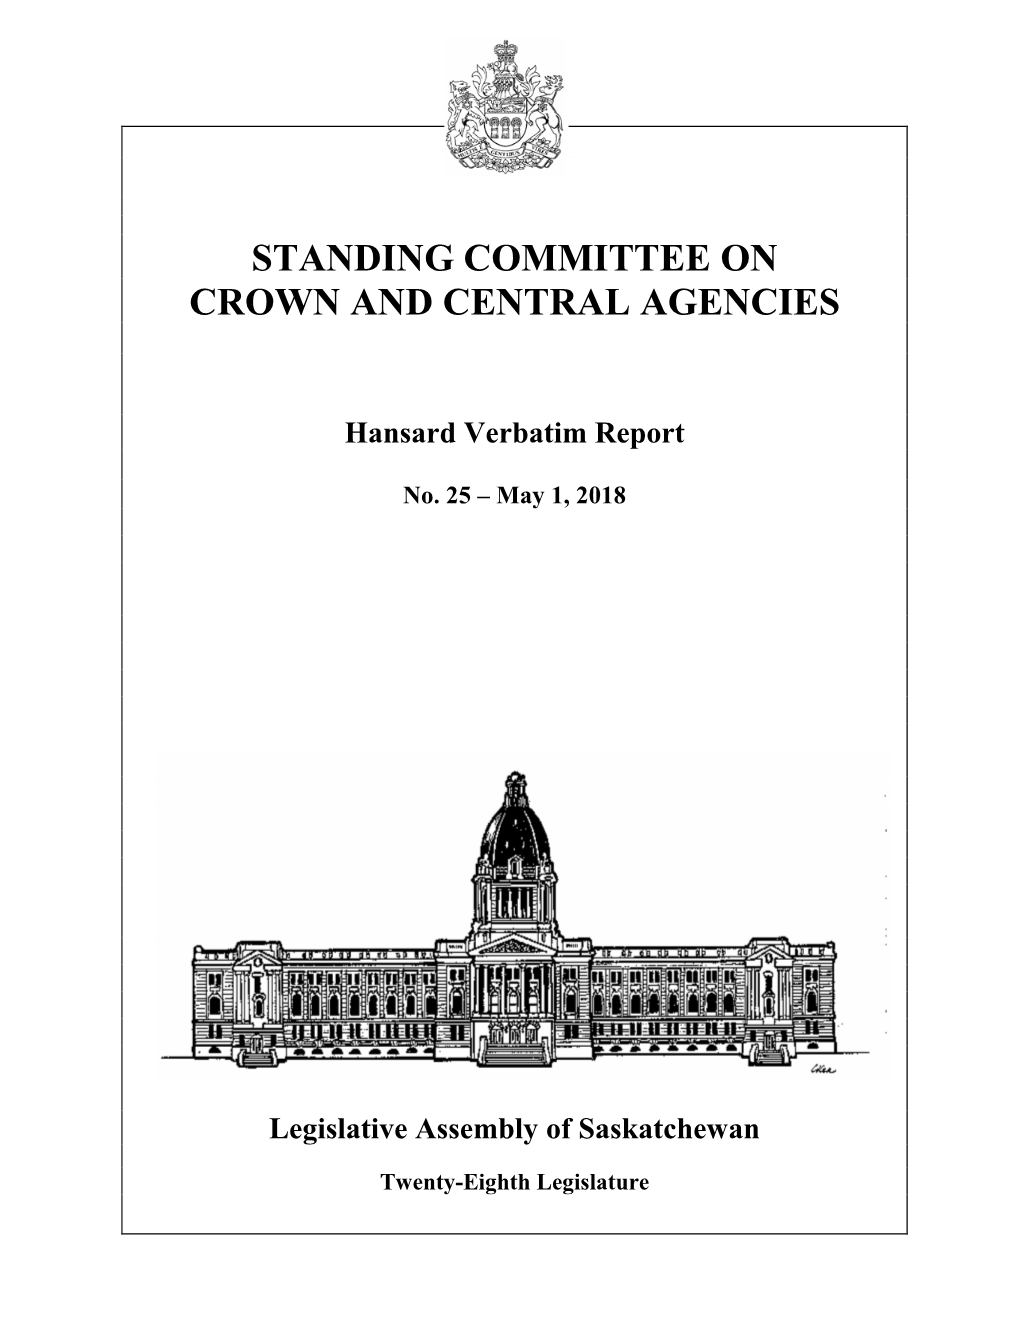 May 1, 2018 Crown and Central Agencies Committee 447